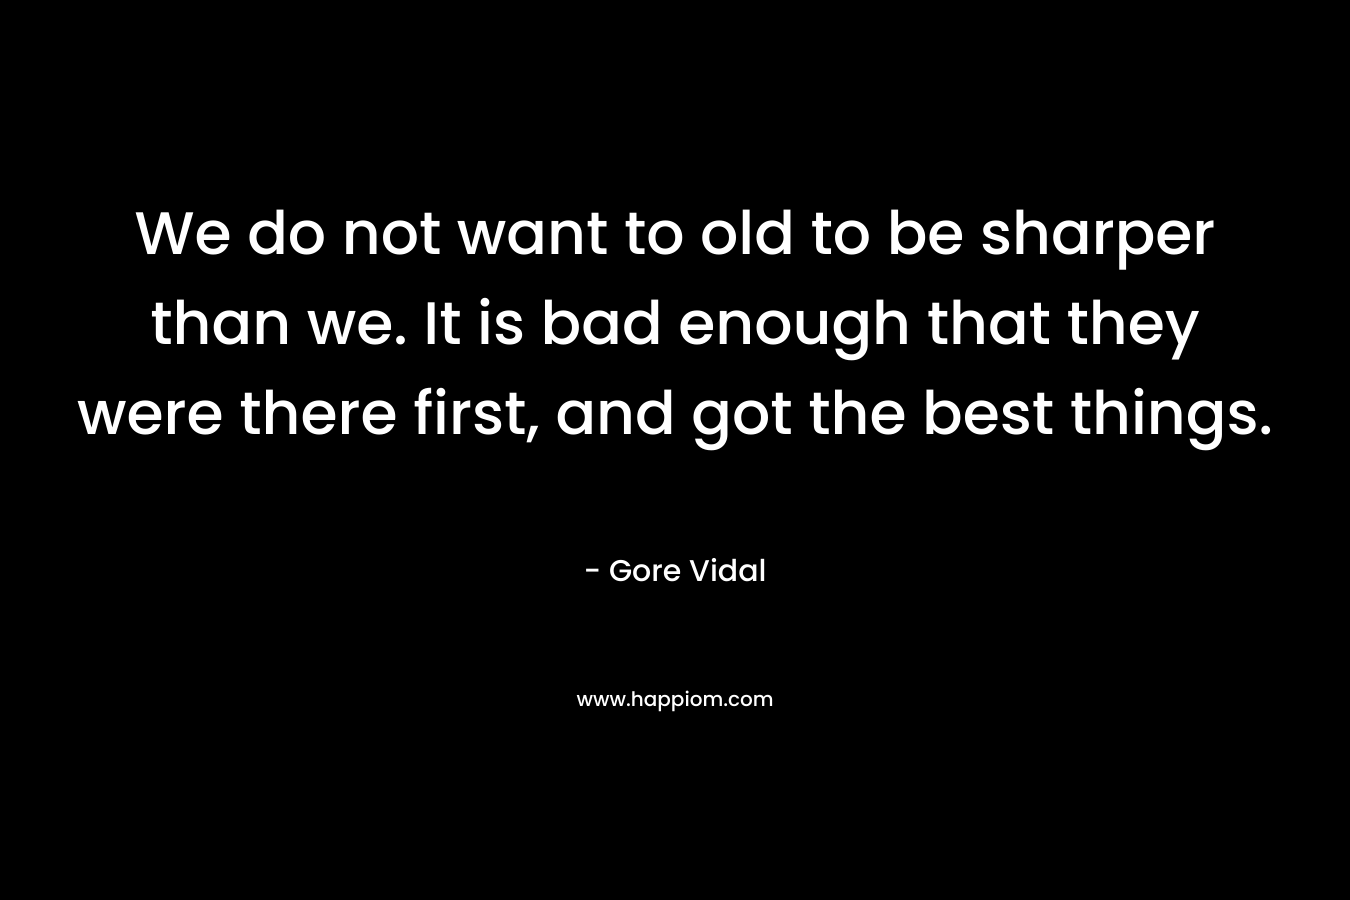 We do not want to old to be sharper than we. It is bad enough that they were there first, and got the best things.